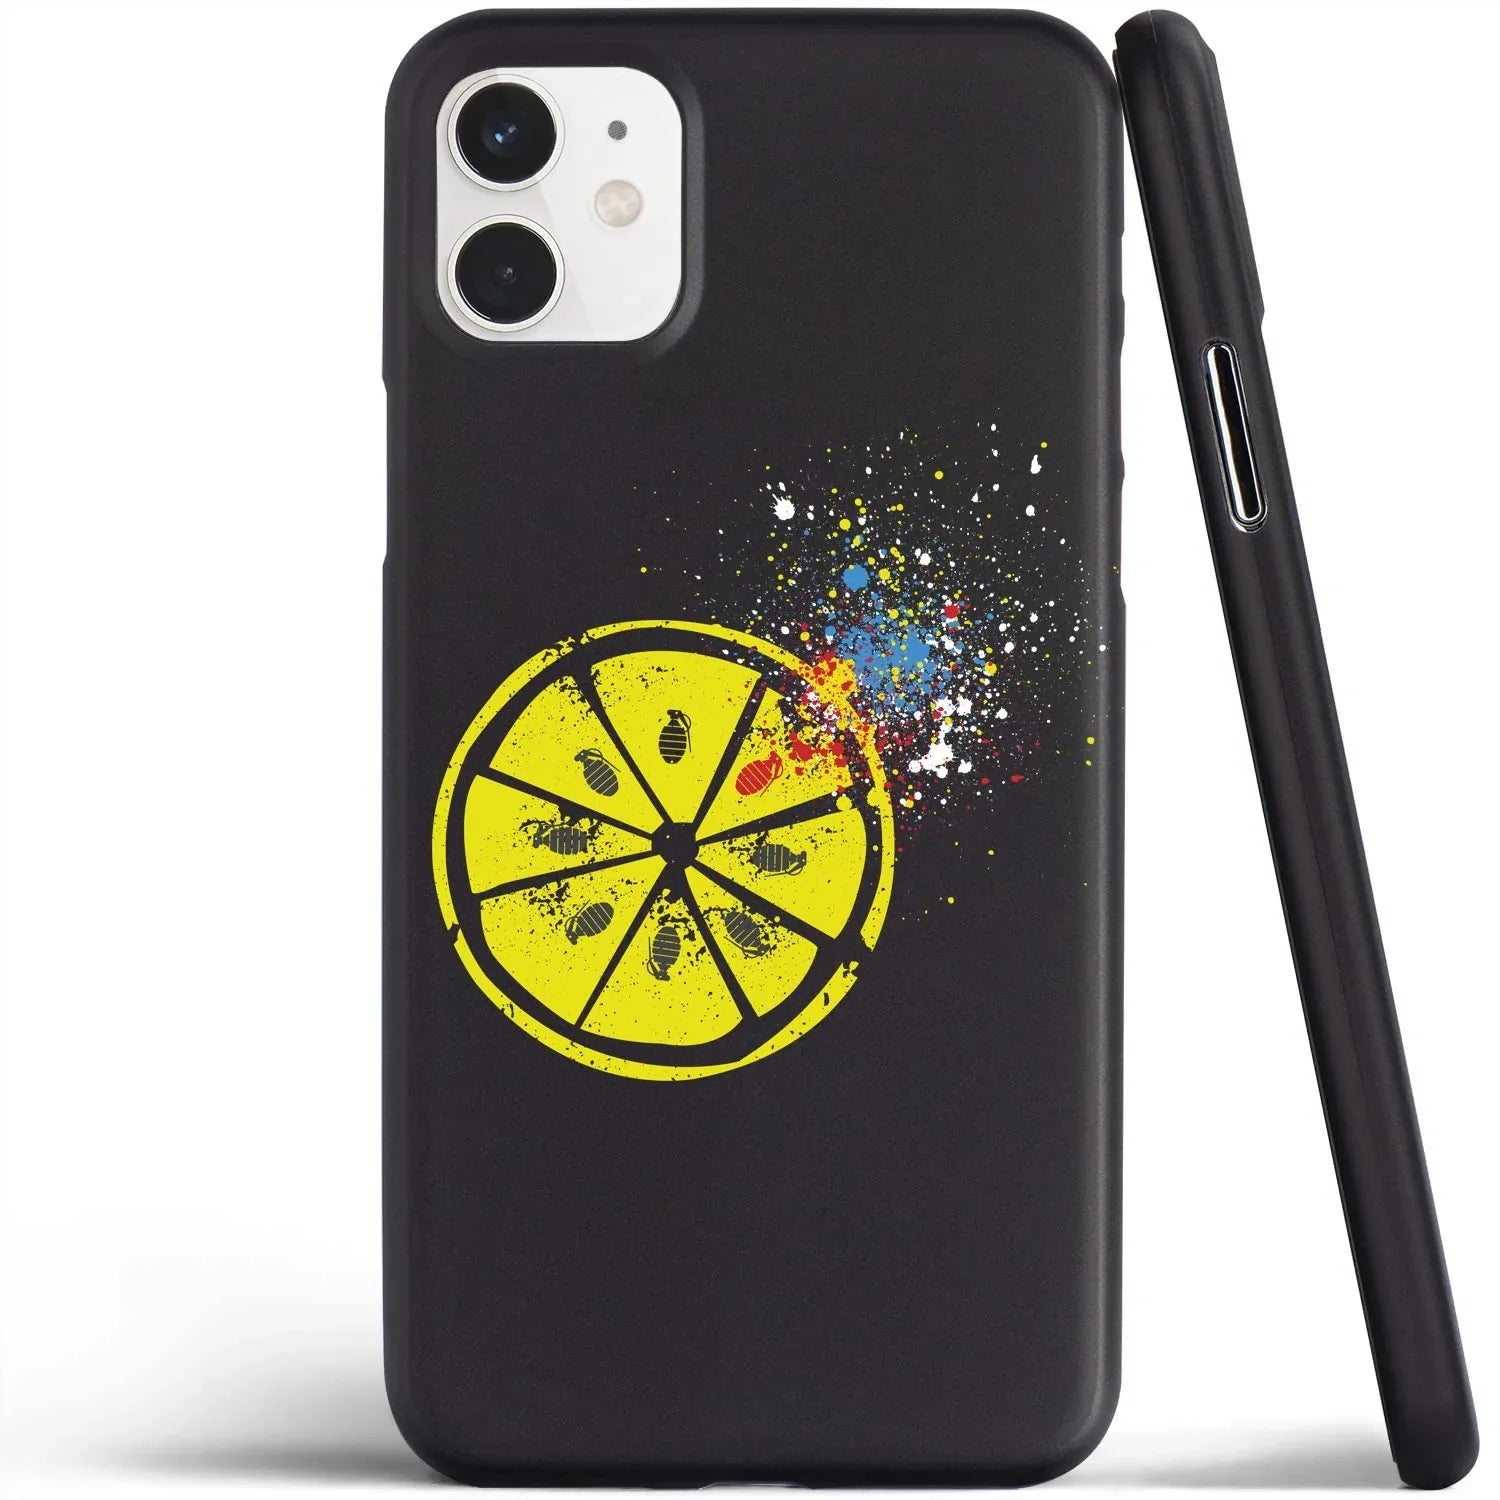 EXPLOSIVE LEMON: Phone Case Inspired by The Stone Roses - SOUND IS COLOUR